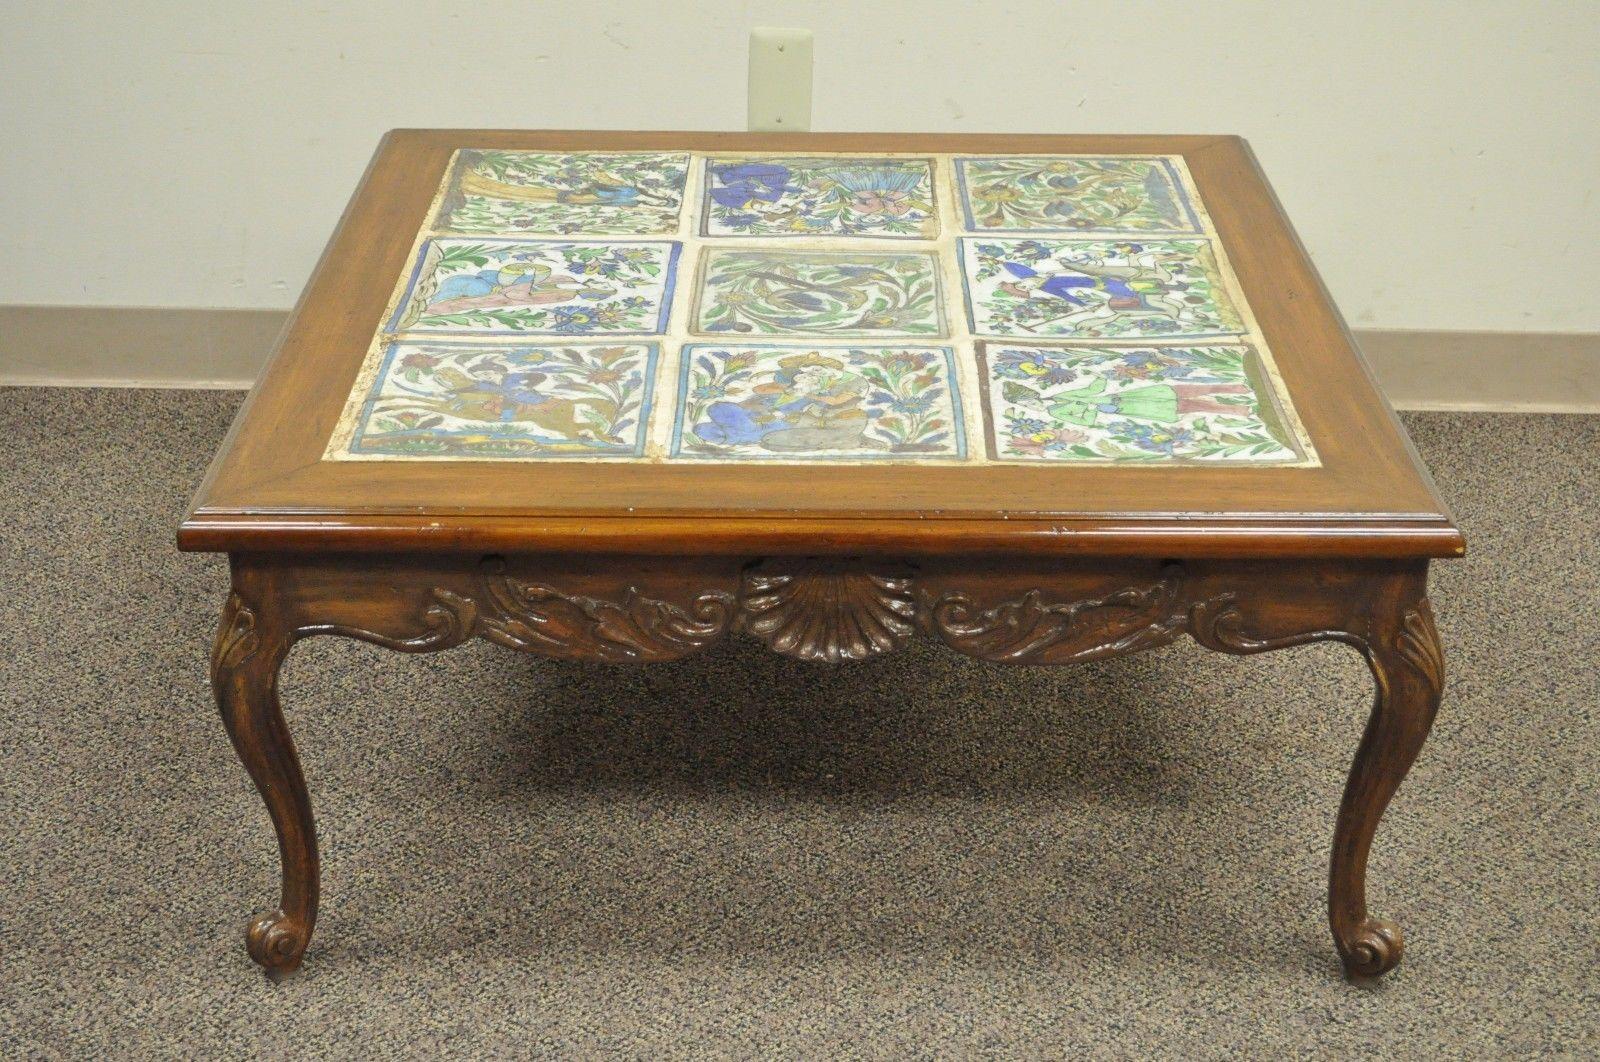 Vintage French country style tile top coffee table. Item features solid carved walnut frame, Louis XV style shell carved skirt, glazed ceramic tile top, Turkish / ottoman style depictions, amazing quality, circa mid-20th century. Measurements: 16